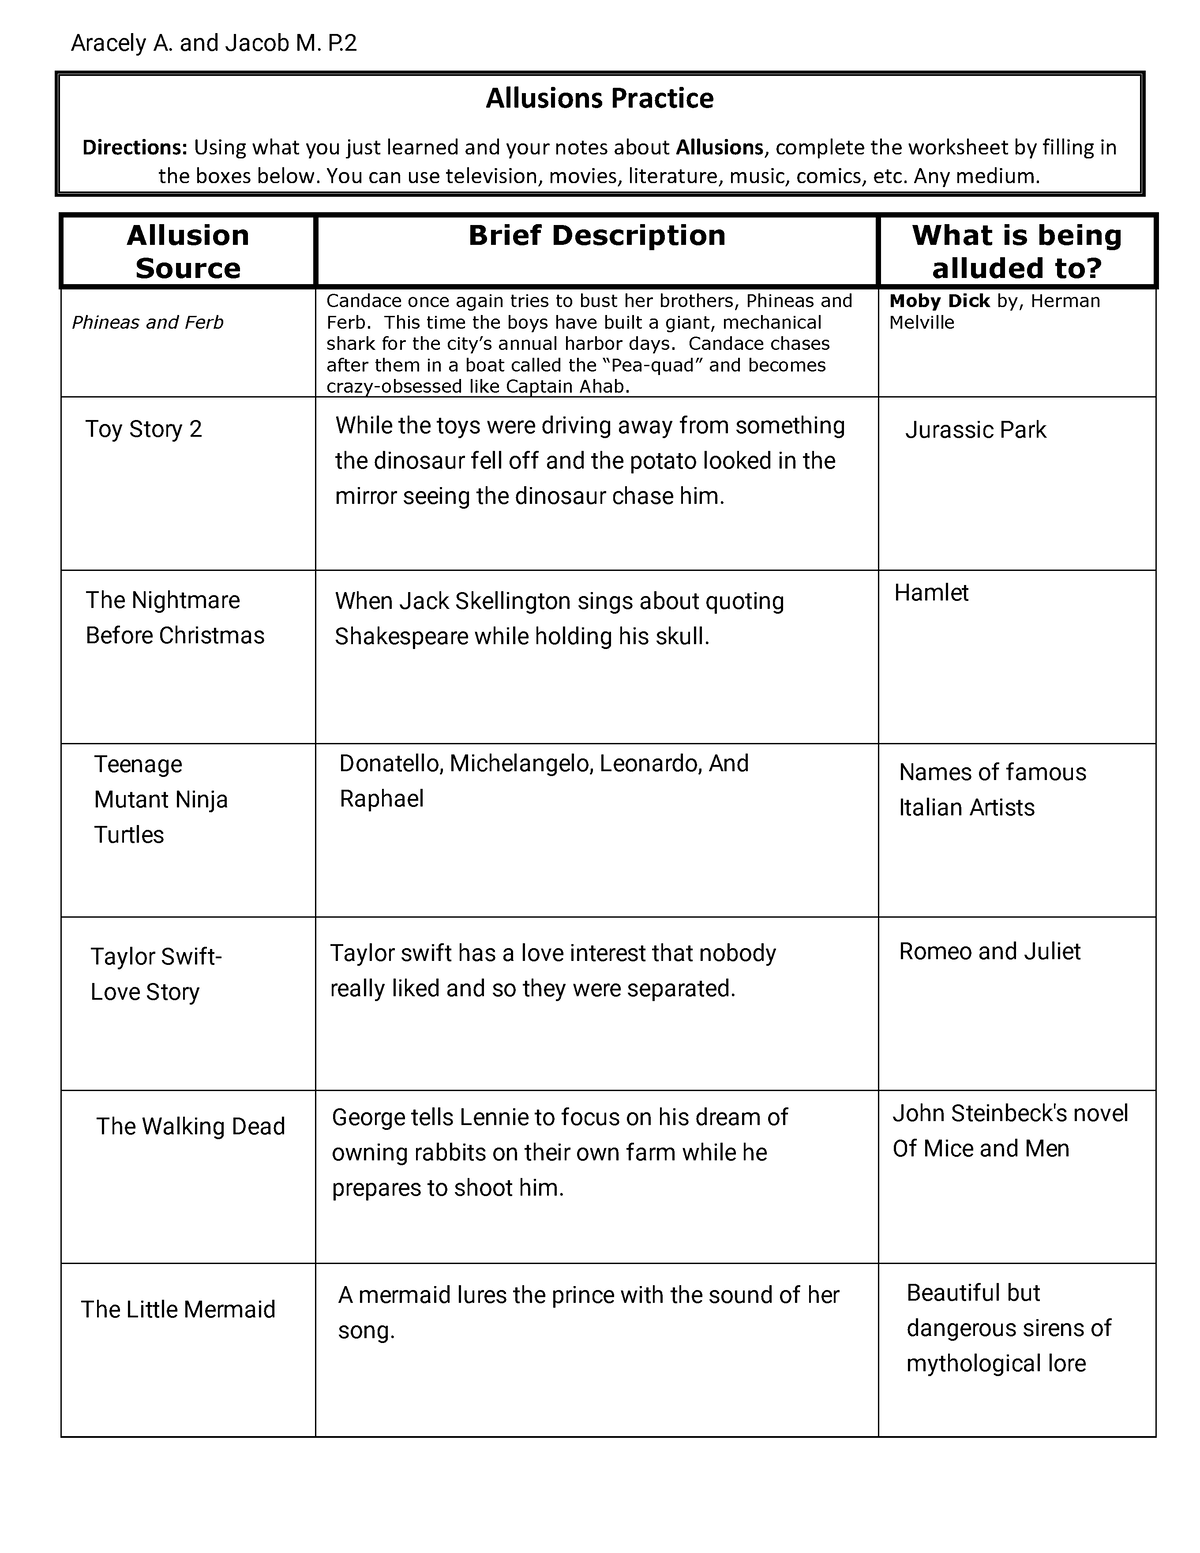 Allusions Practice Worksheet Allusions Practice Directions Using 